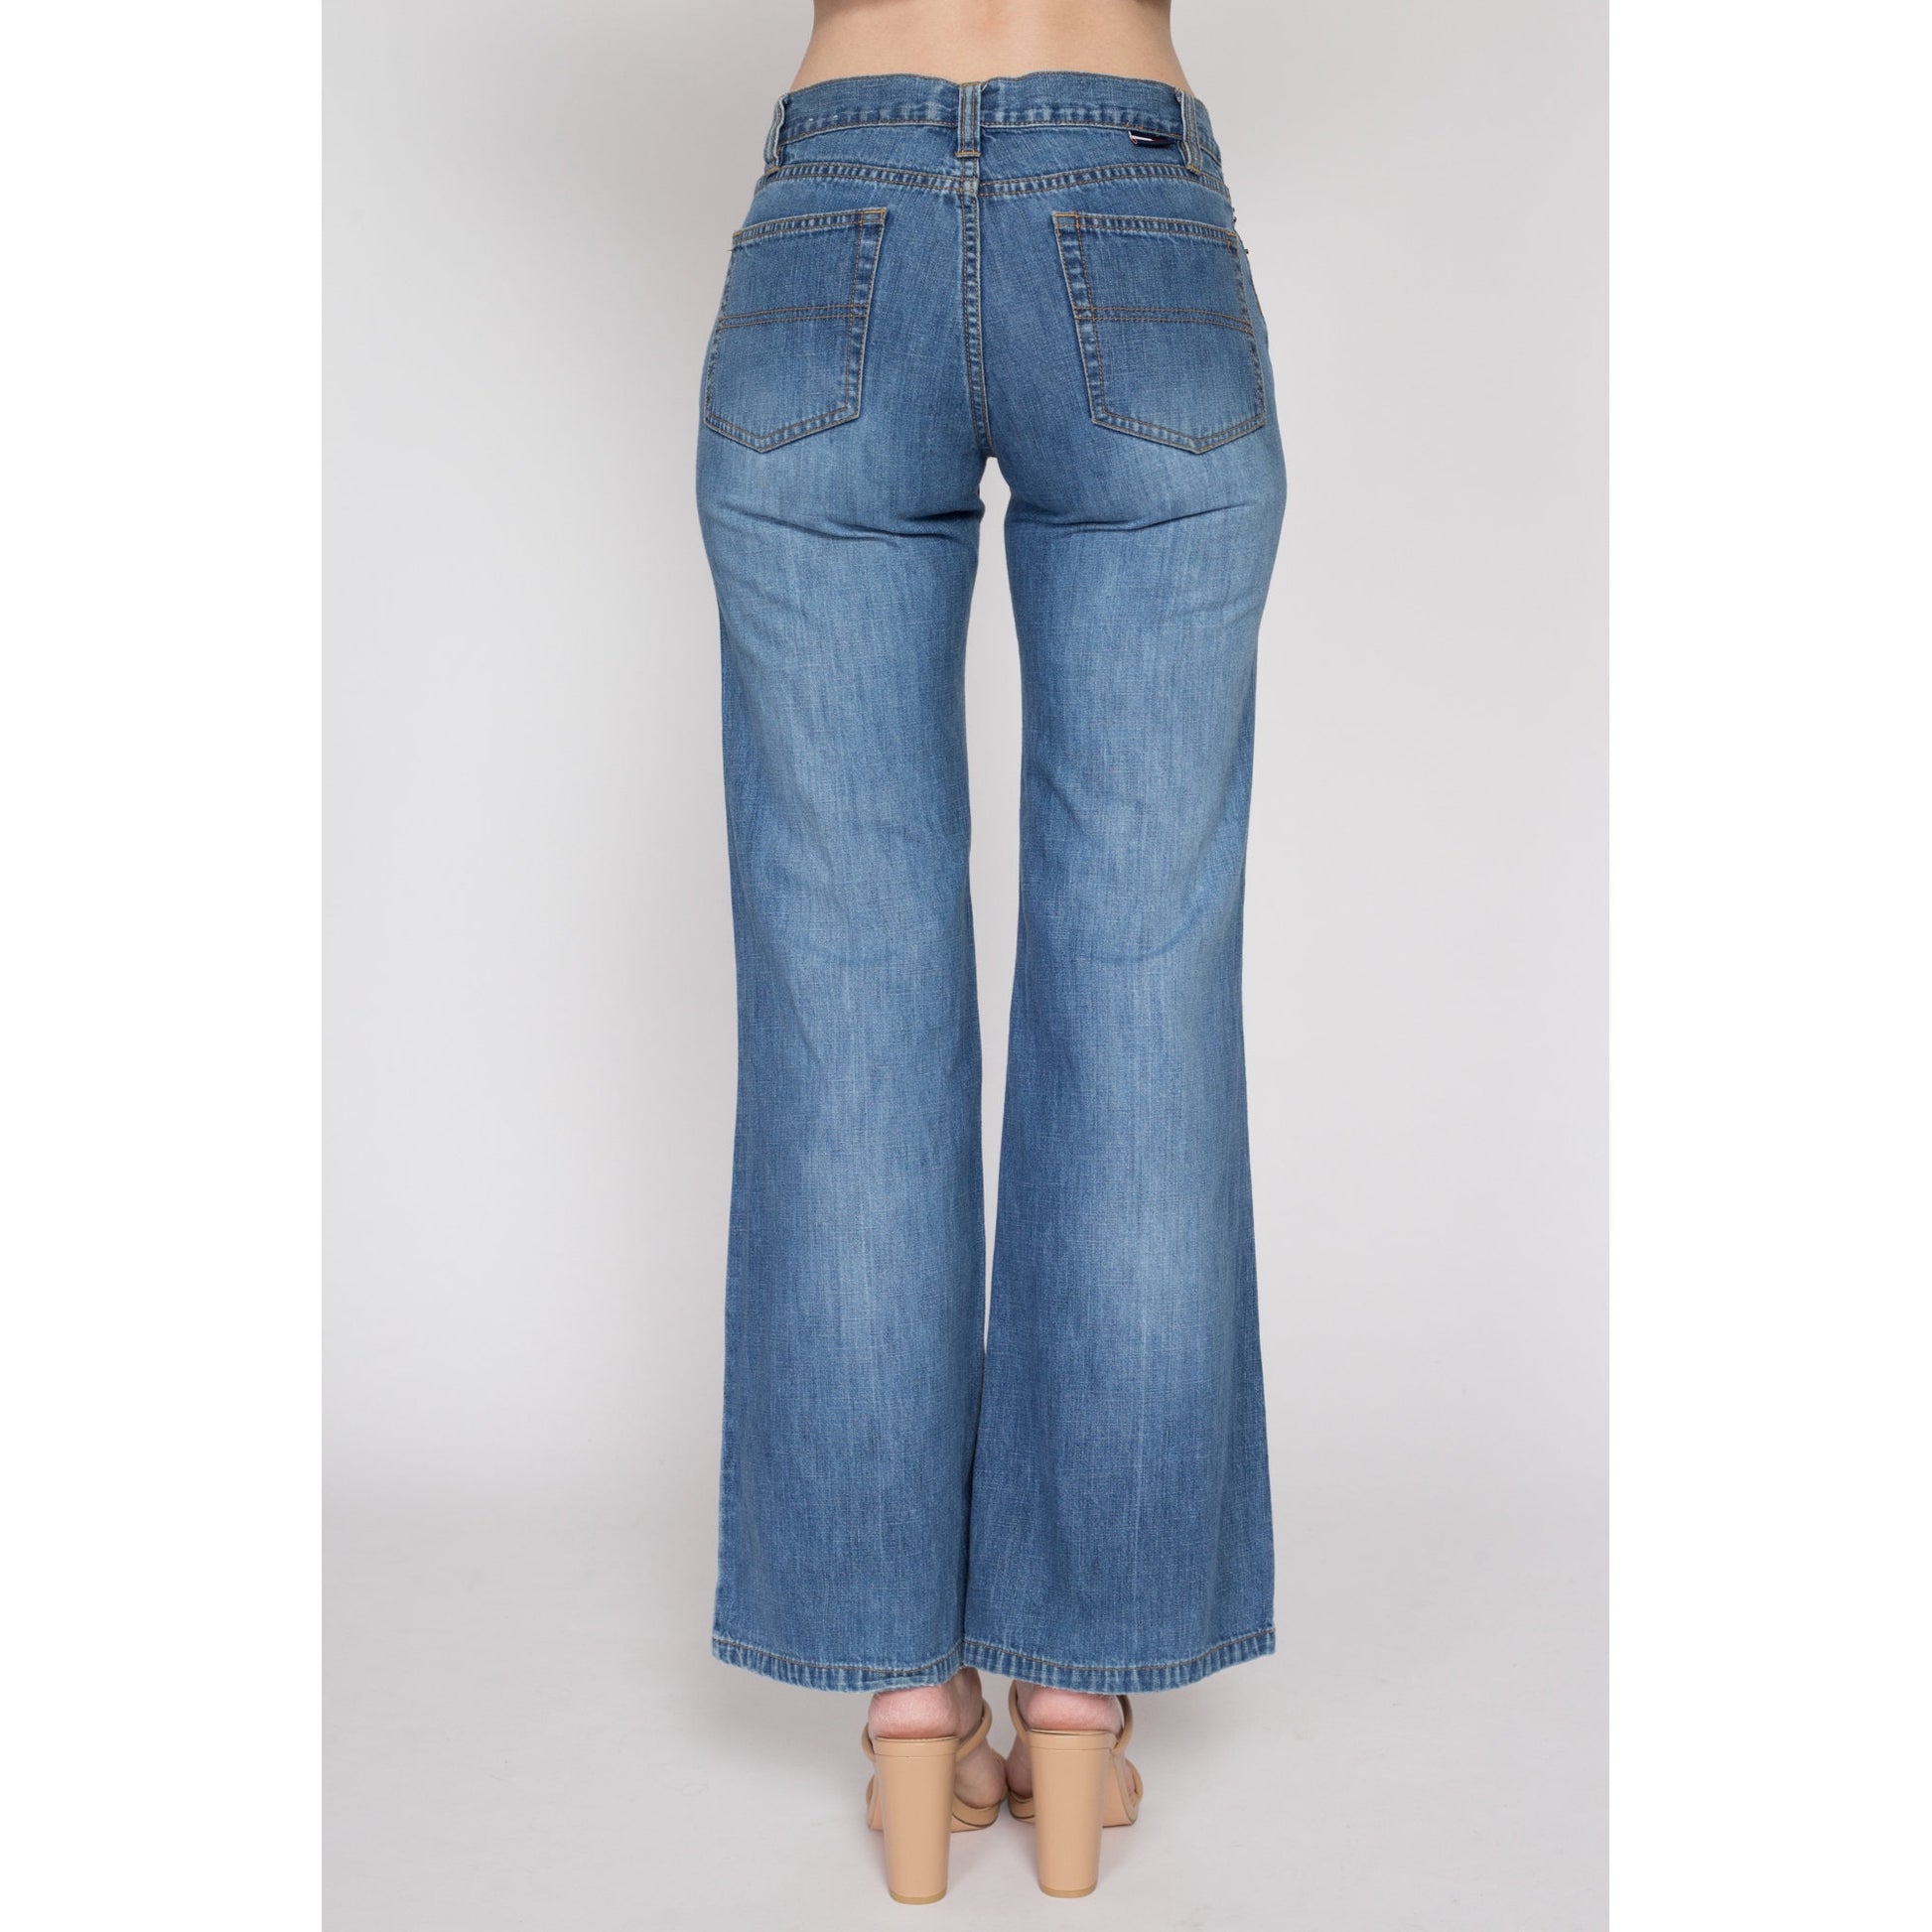 Small Y2K Tommy Hilfiger Low Rise Jeans | Vintage Faded Denim Wide Leg Bootcut Flared Jeans